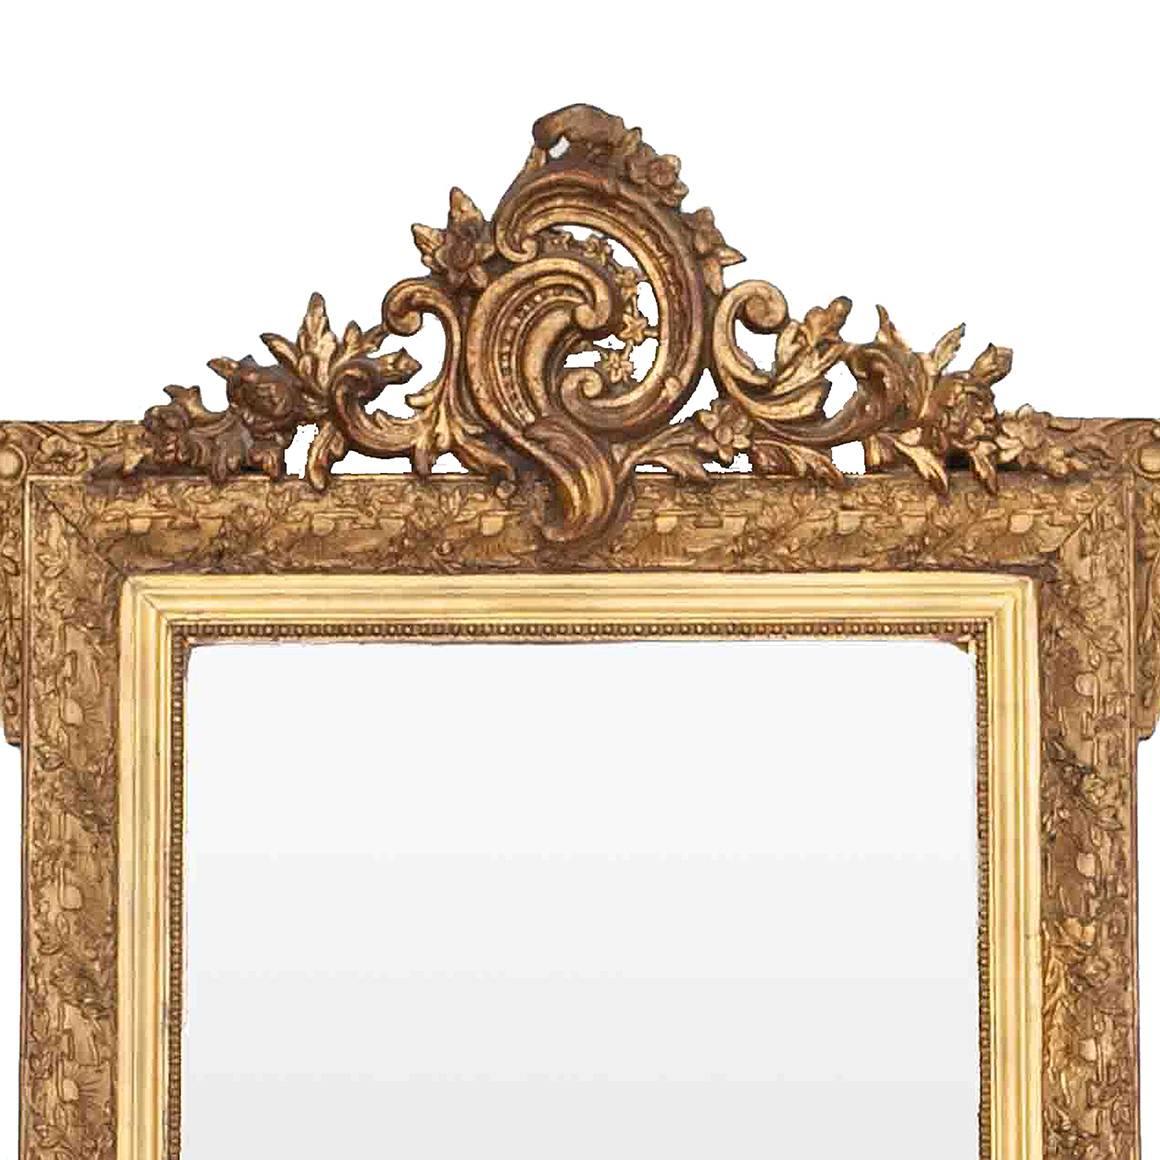 19th century gilt wall mirror. With a foliage and sunburst motif and a crest of S and C scrolls.